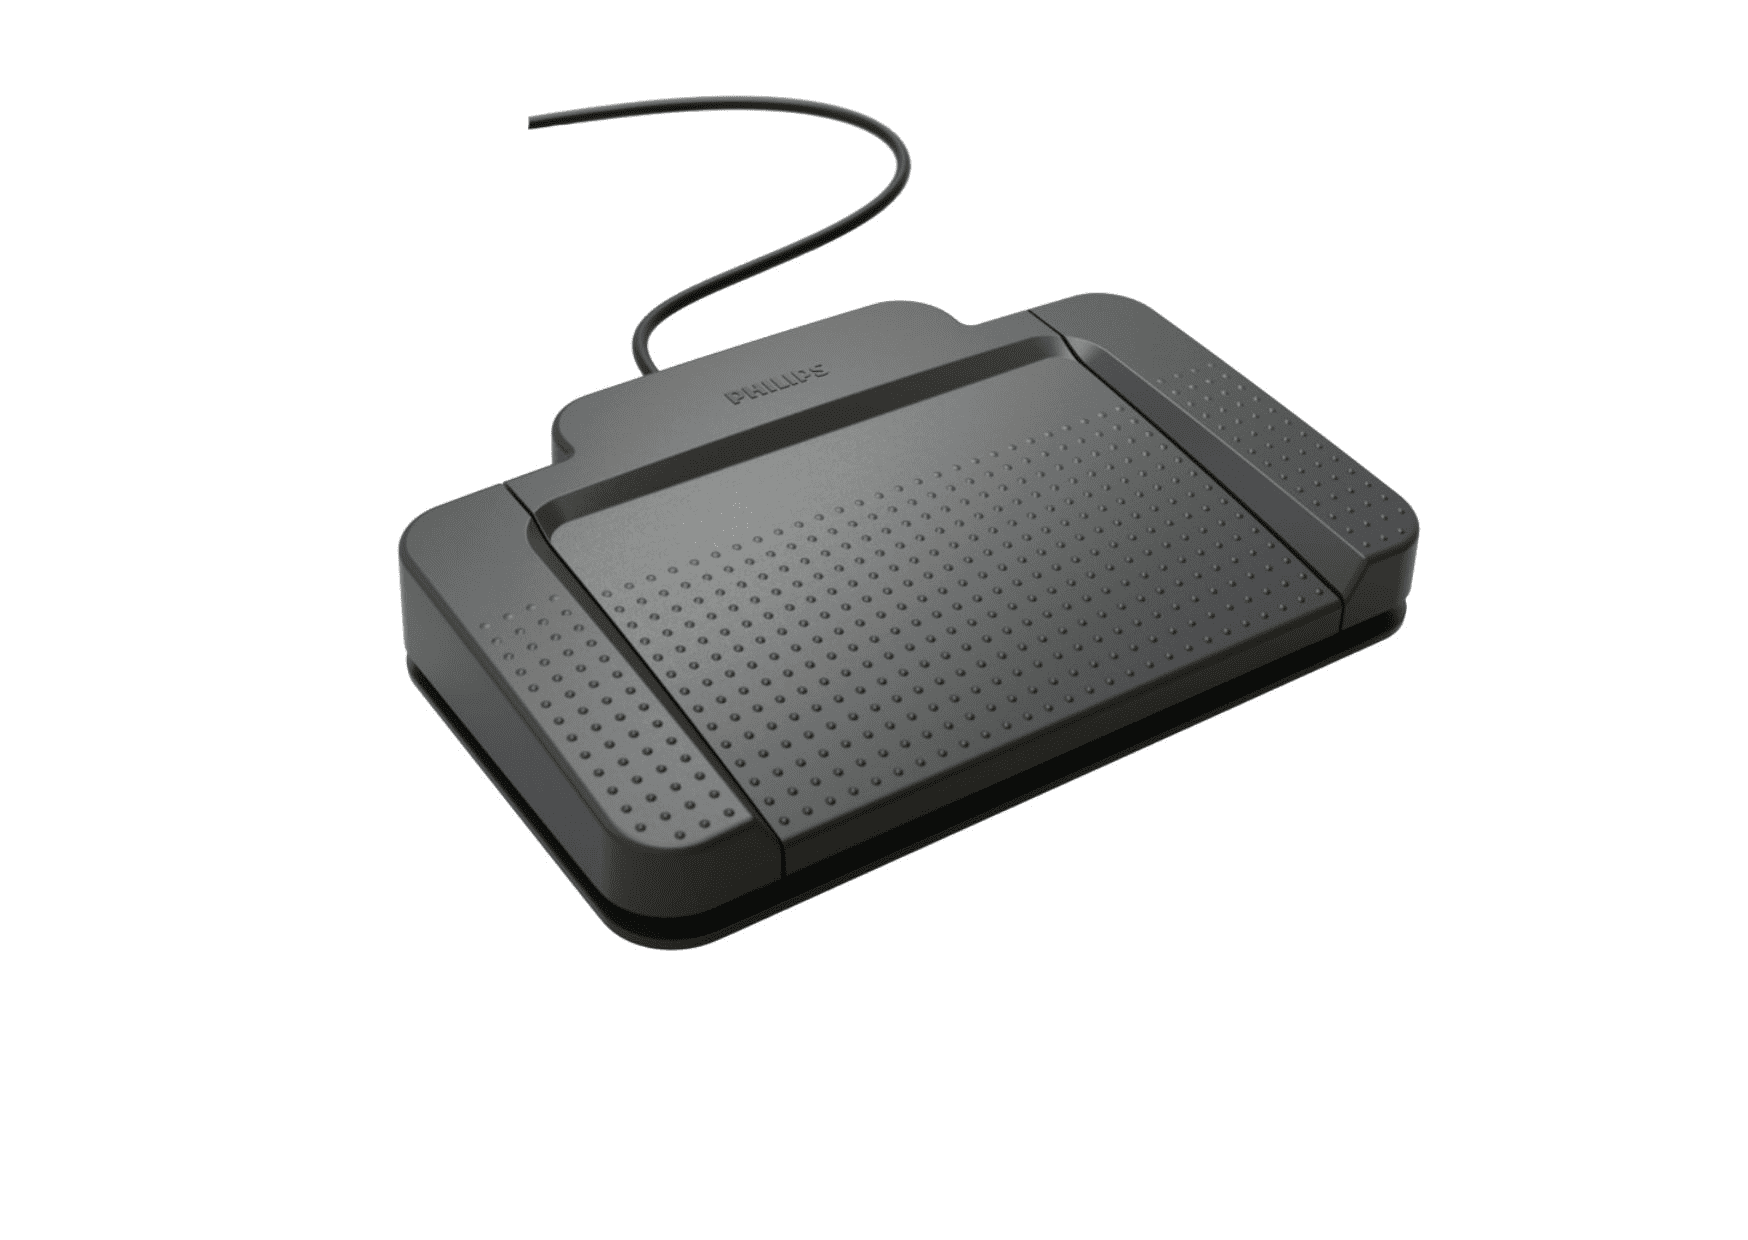 Philips ACC2320 USB Foot Control Pedal Refurbished